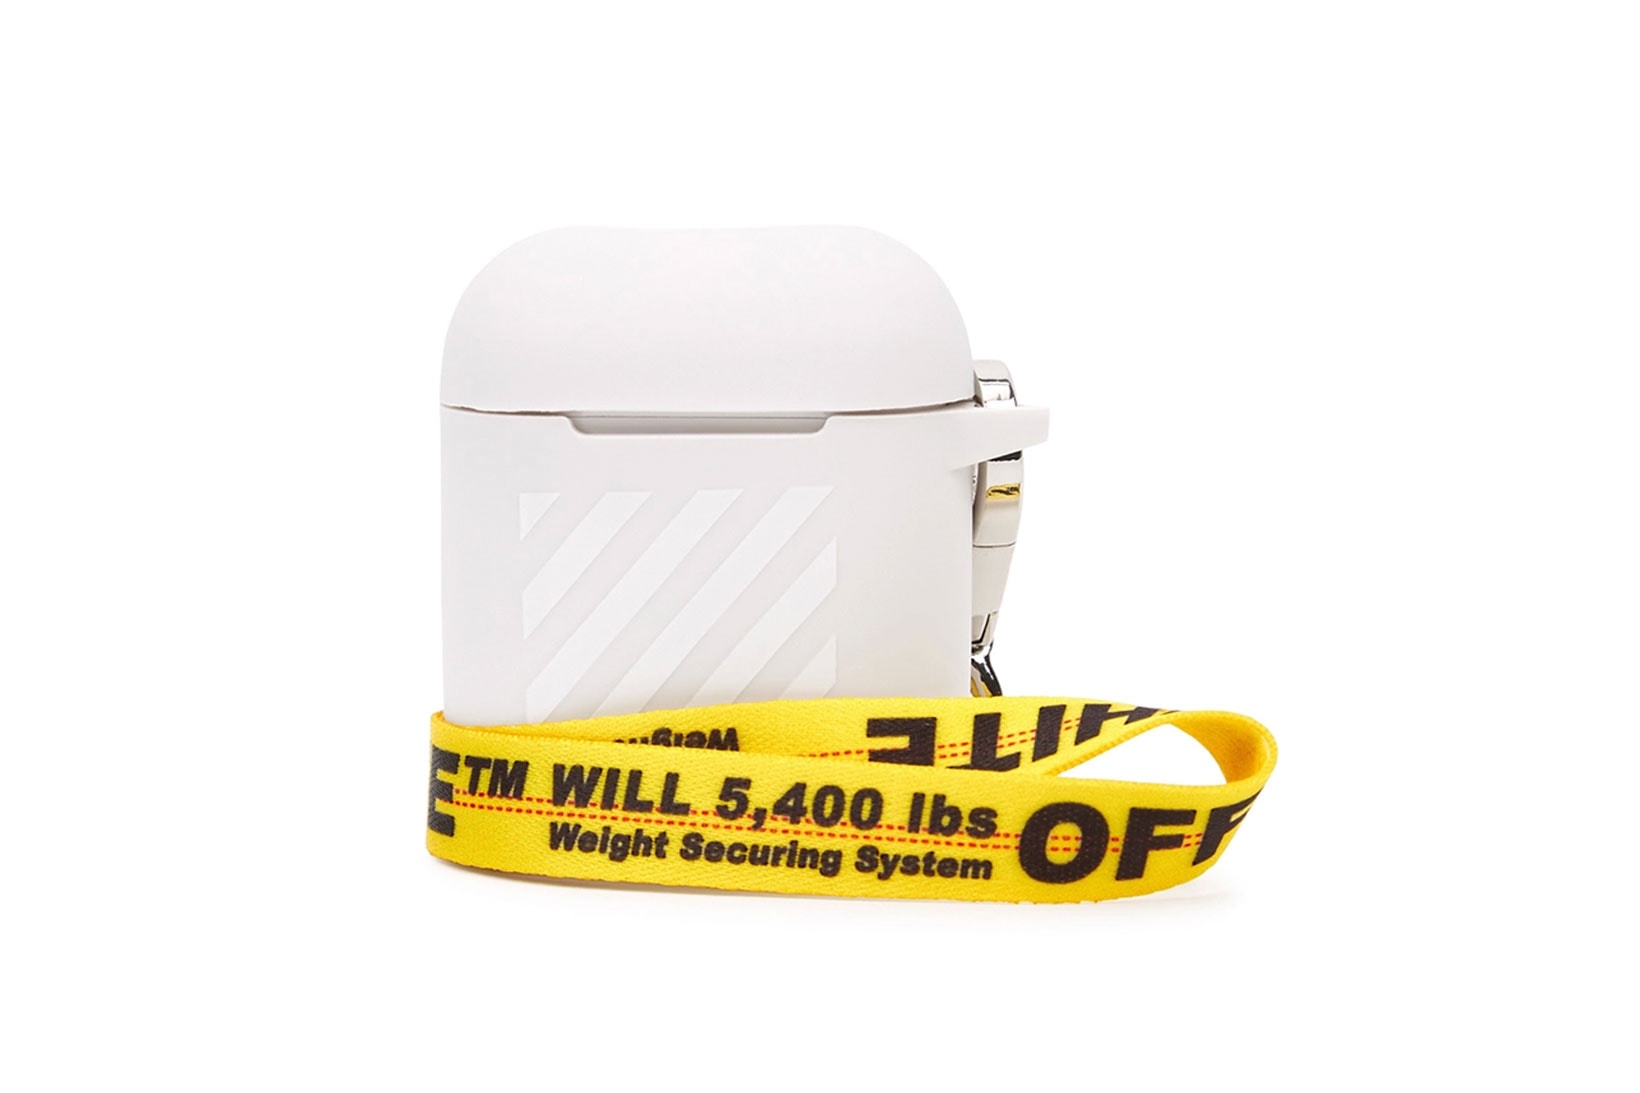 off white airpods pro cases covers gray logo yellow strap